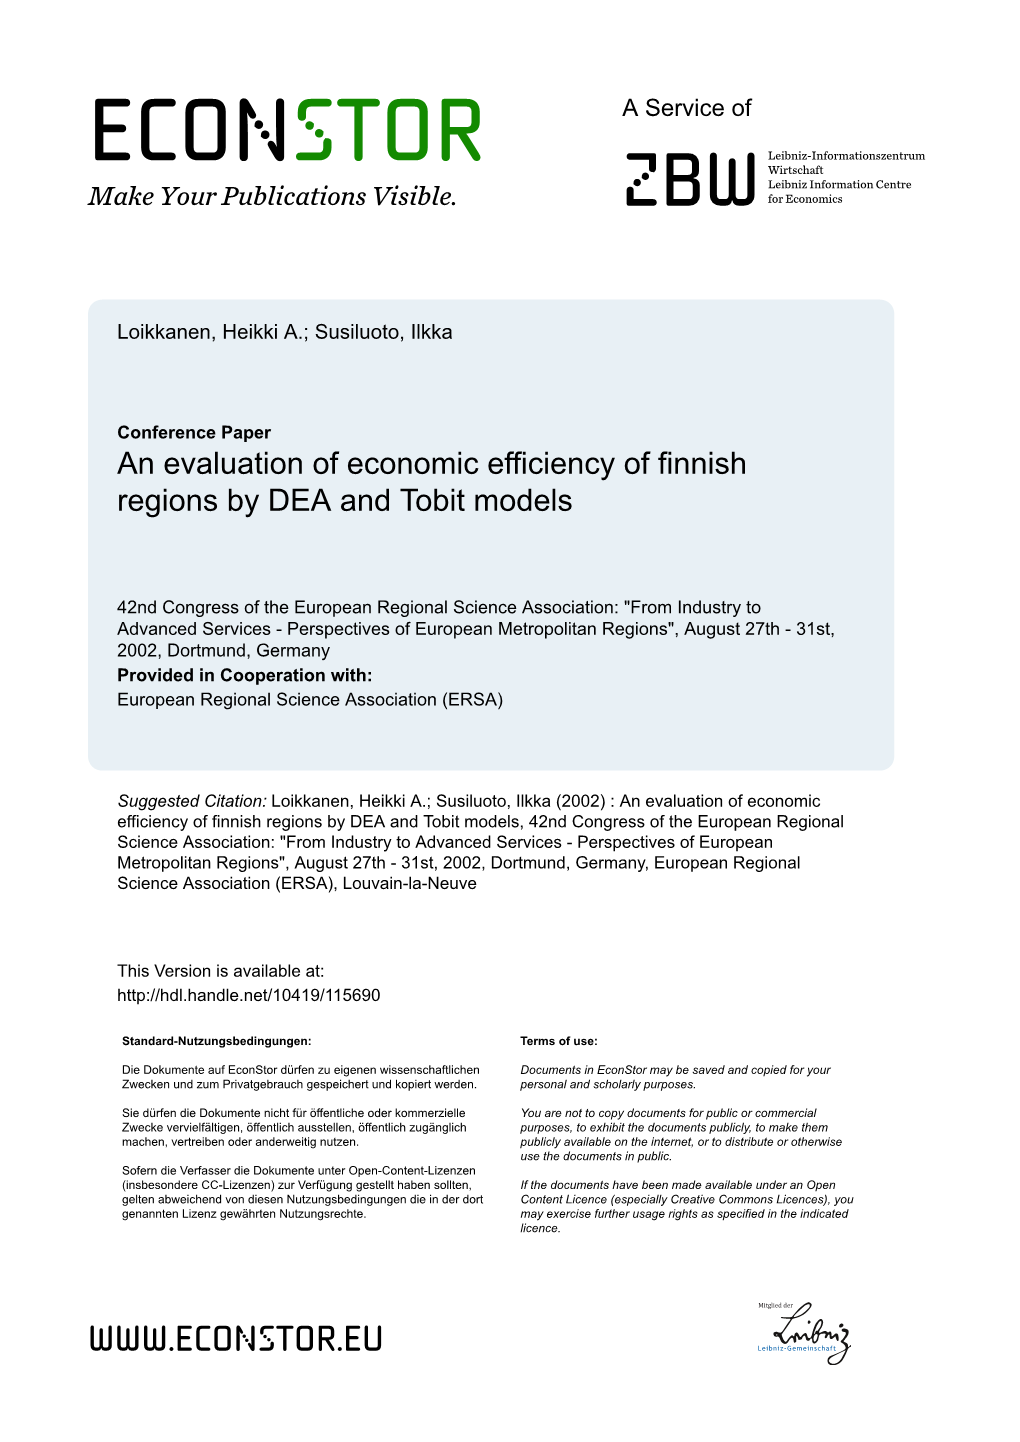 An Evaluation of Economic Efficiency of Finnish Regions by DEA and Tobit Models